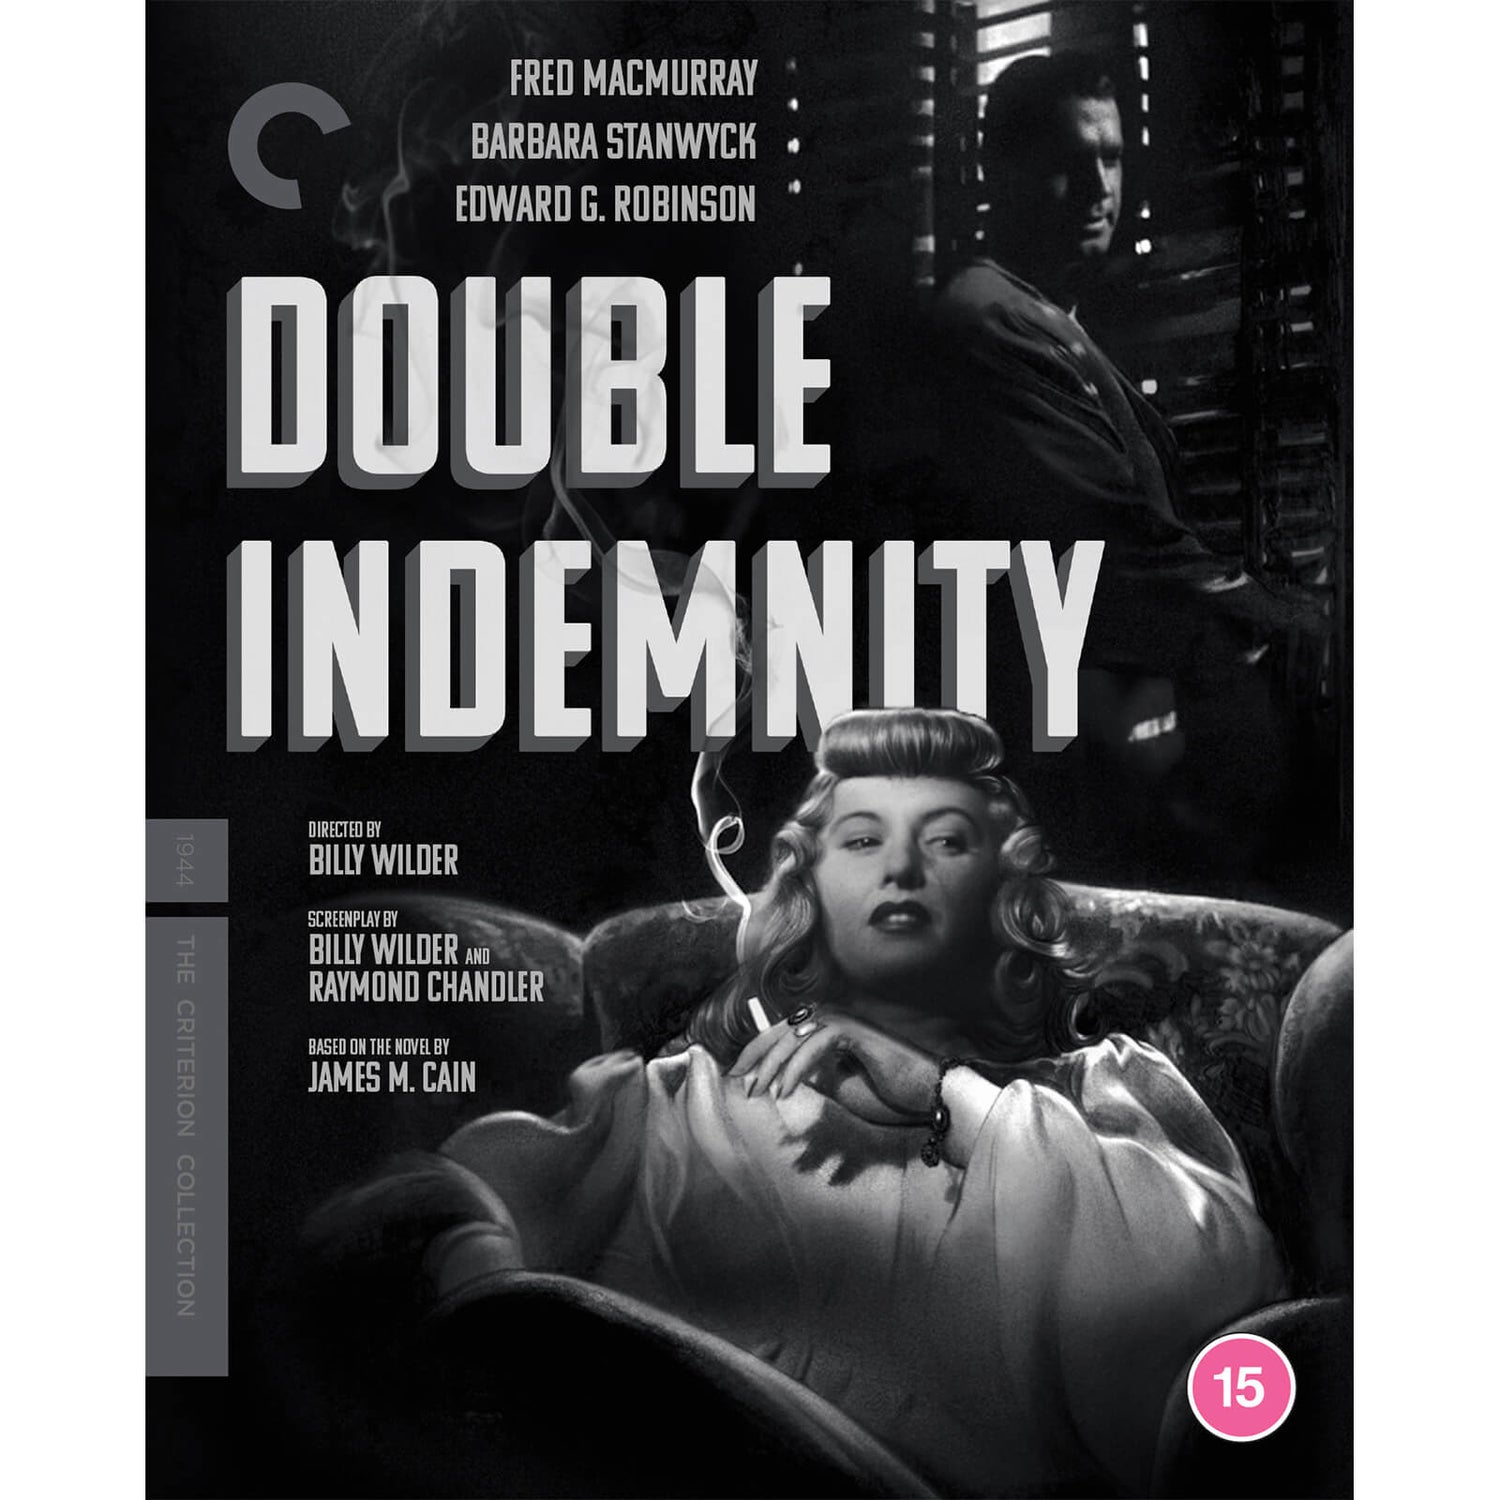 Double Indemnity - The Criterion Collection